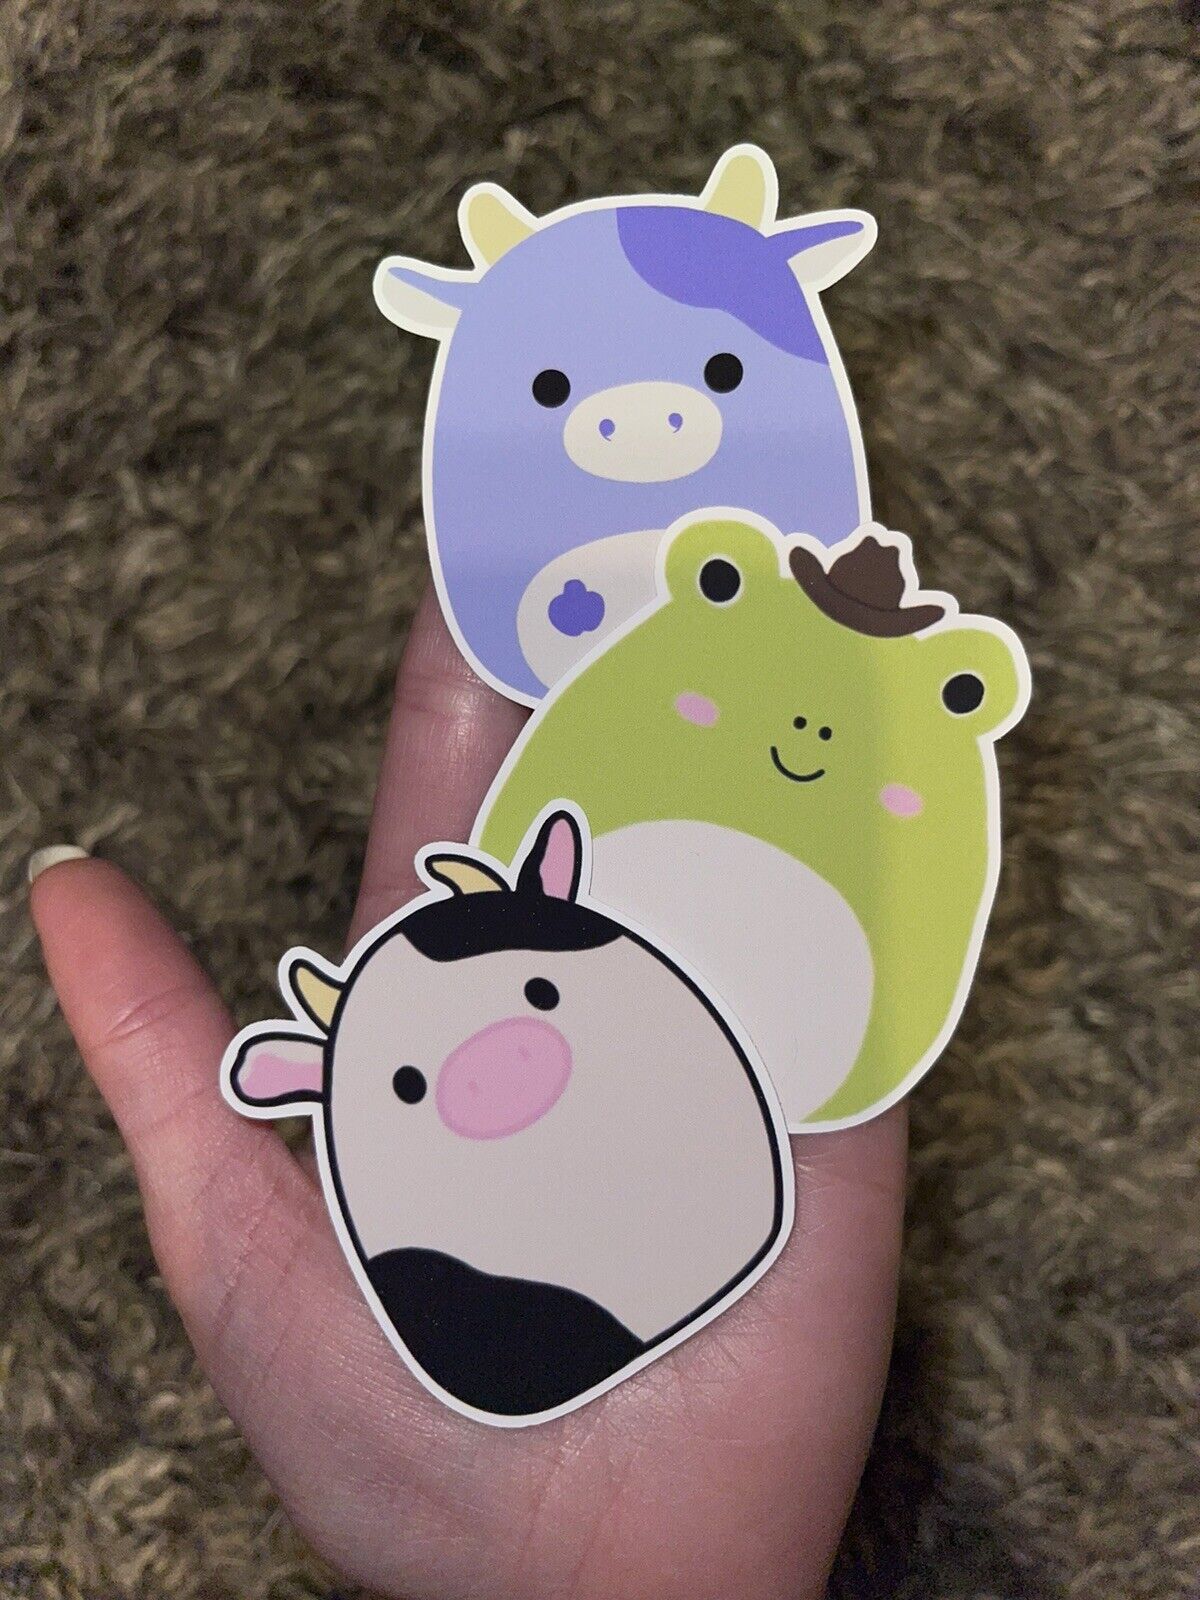 Tiny Stickers - Squishmallows Easter Special Edition – Affirm My Way